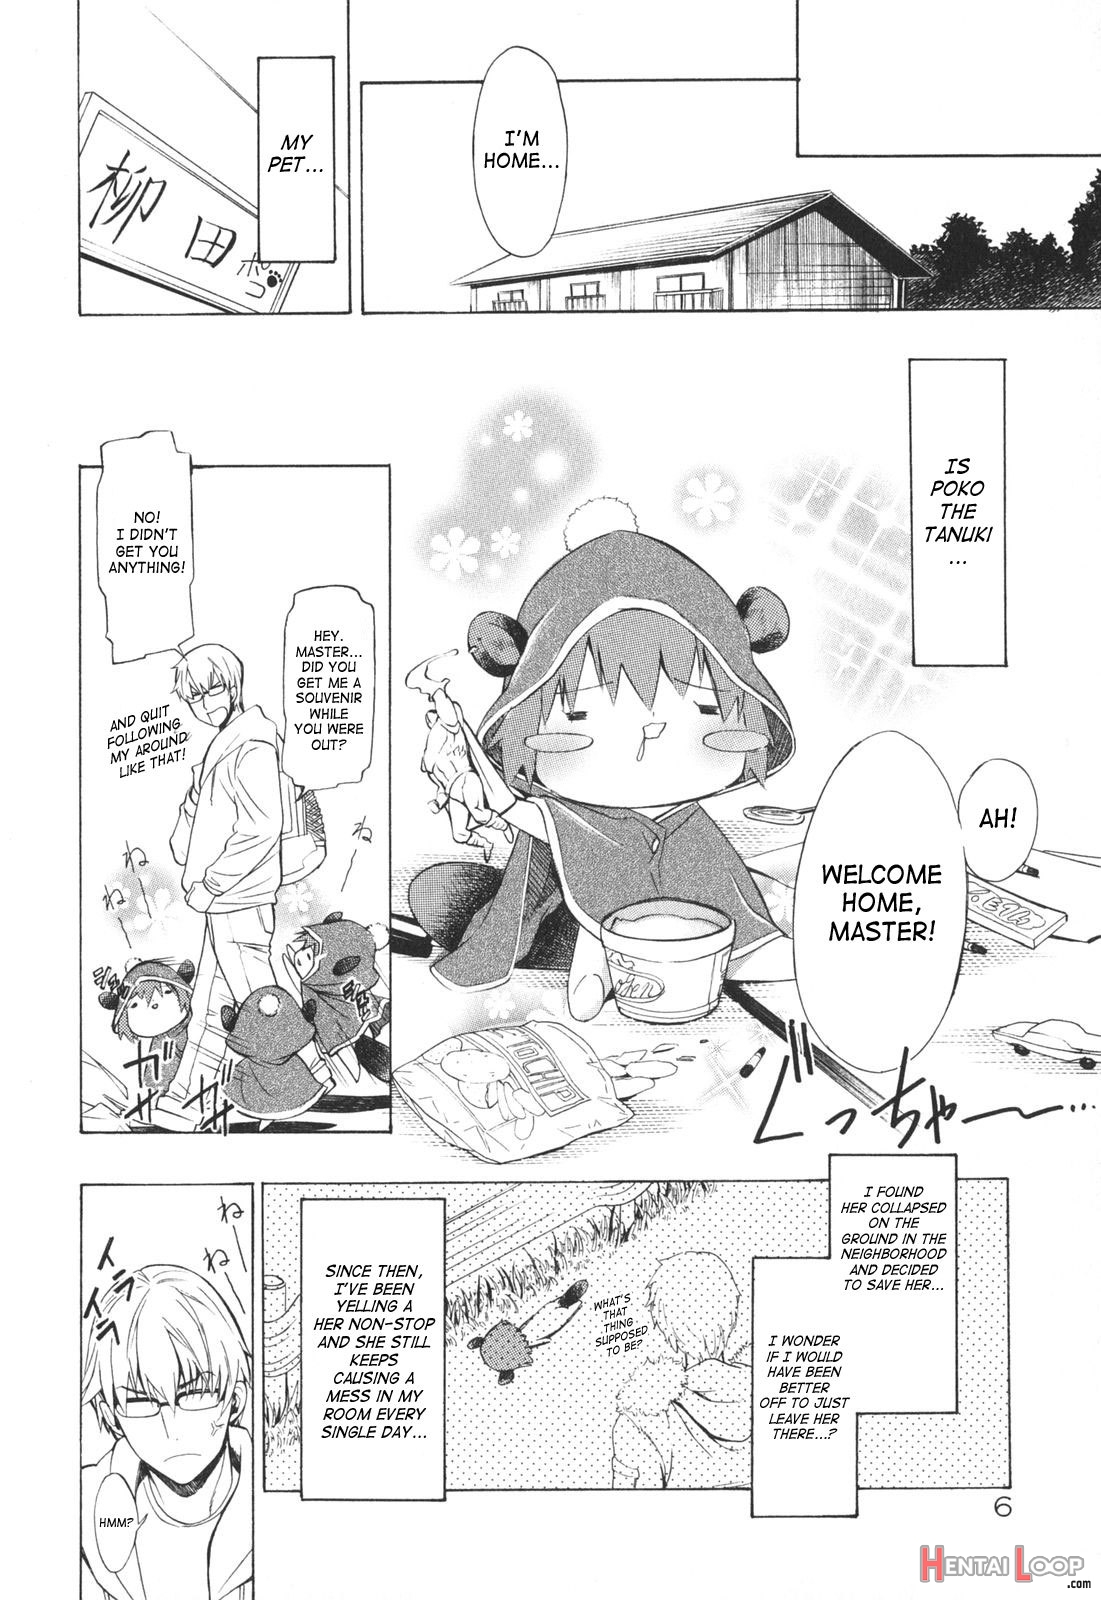 Poko To Issho page 7